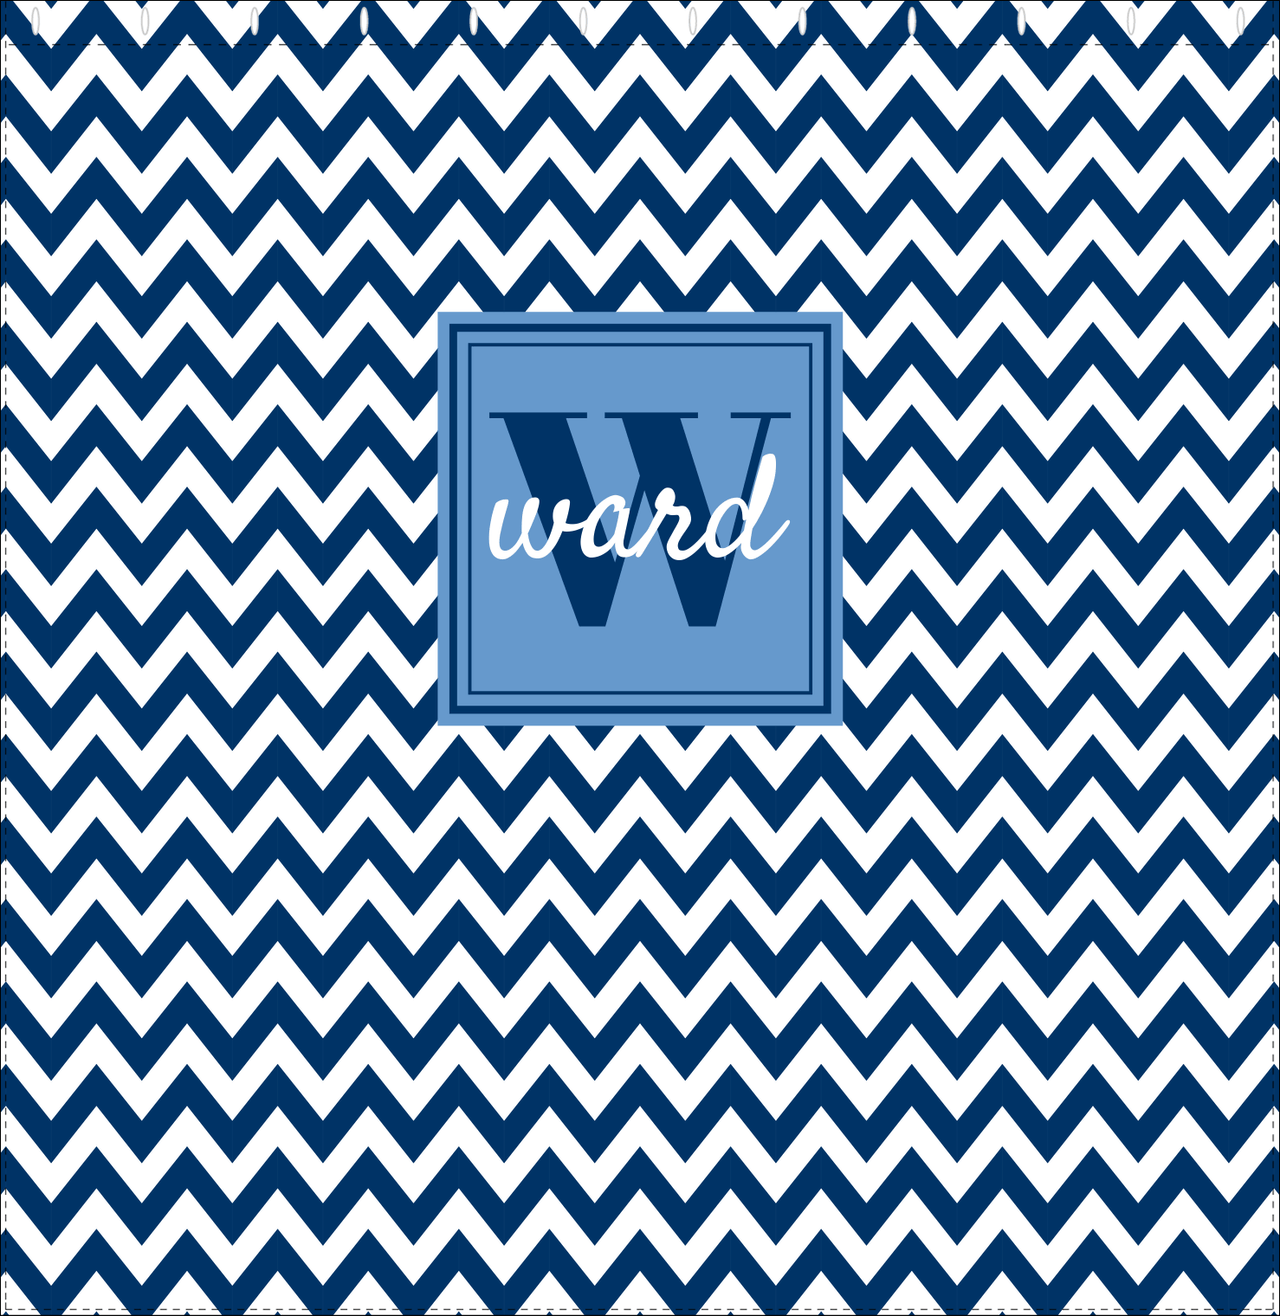 Personalized Chevron Shower Curtain II - Blue and White - Square Nameplate - Decorate View